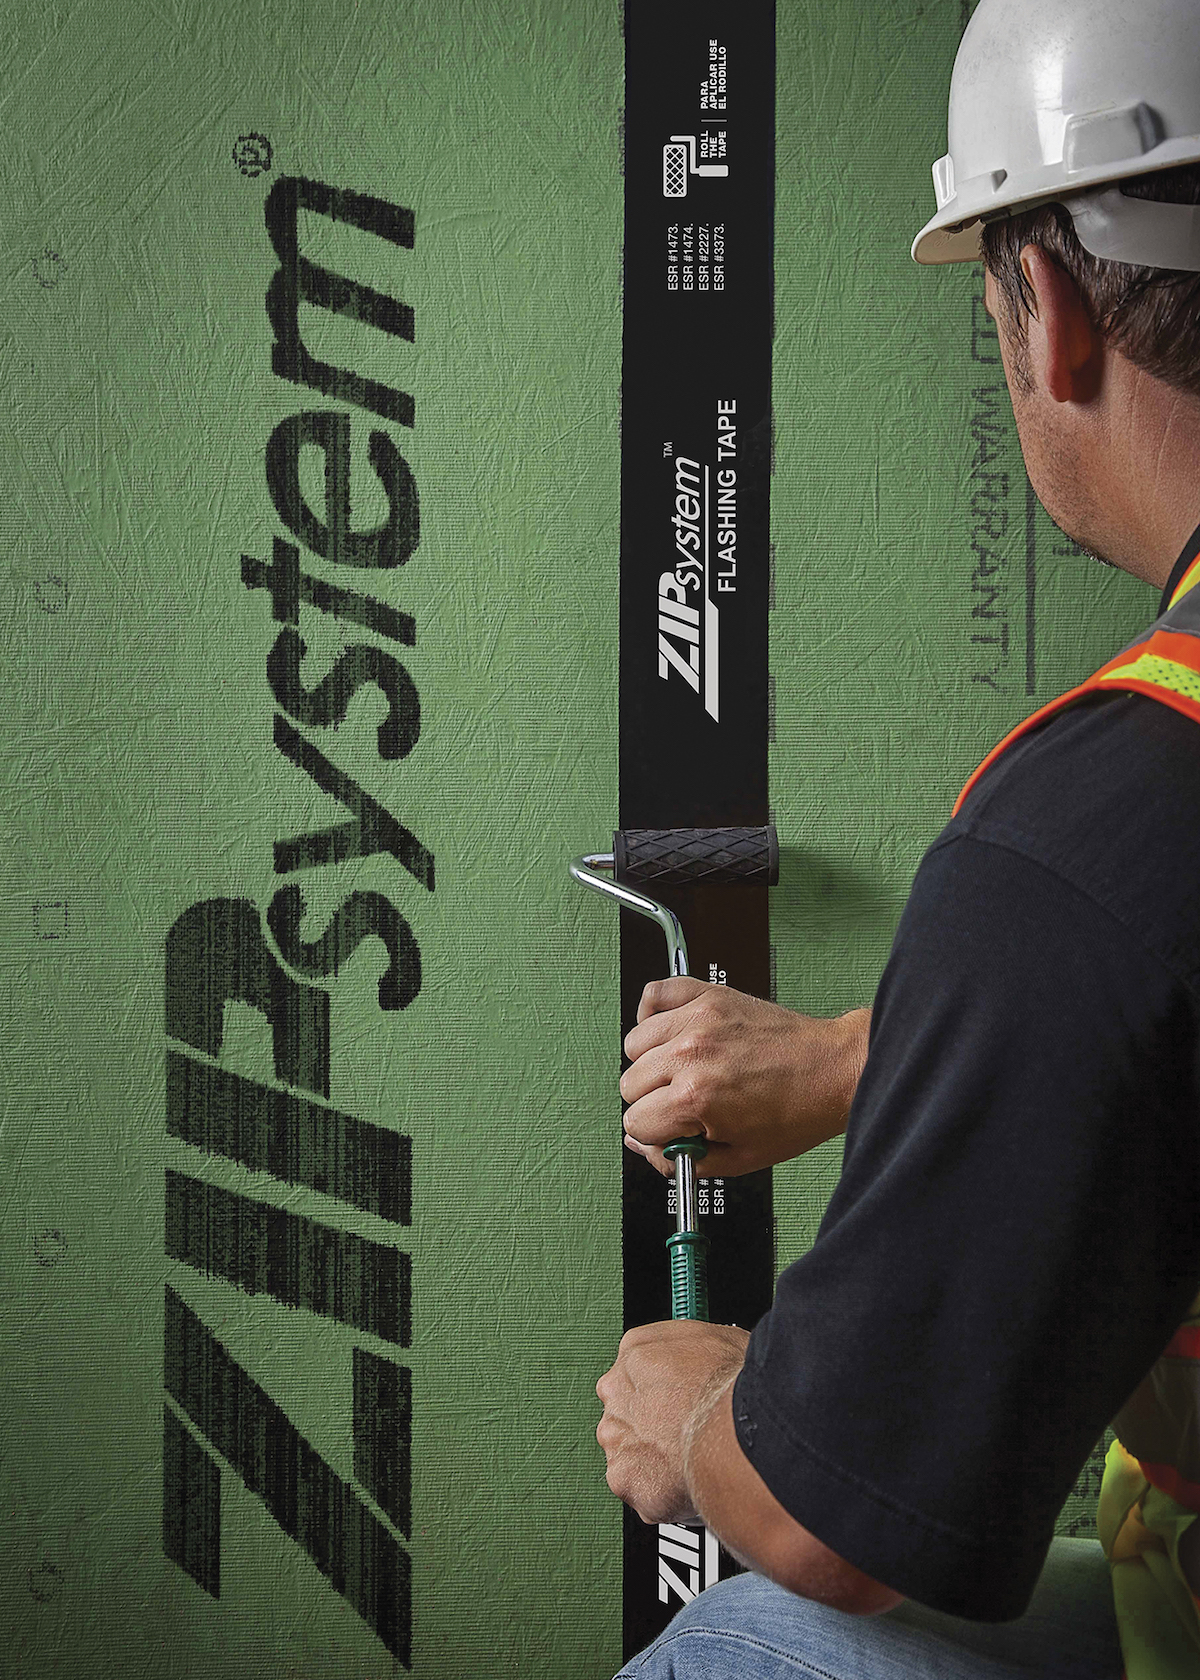 Zip System sheathing and tape is a structural roof and wall system with an integrated water-resistant and air barrier that streamlines the weatherization of a building to a two-step process